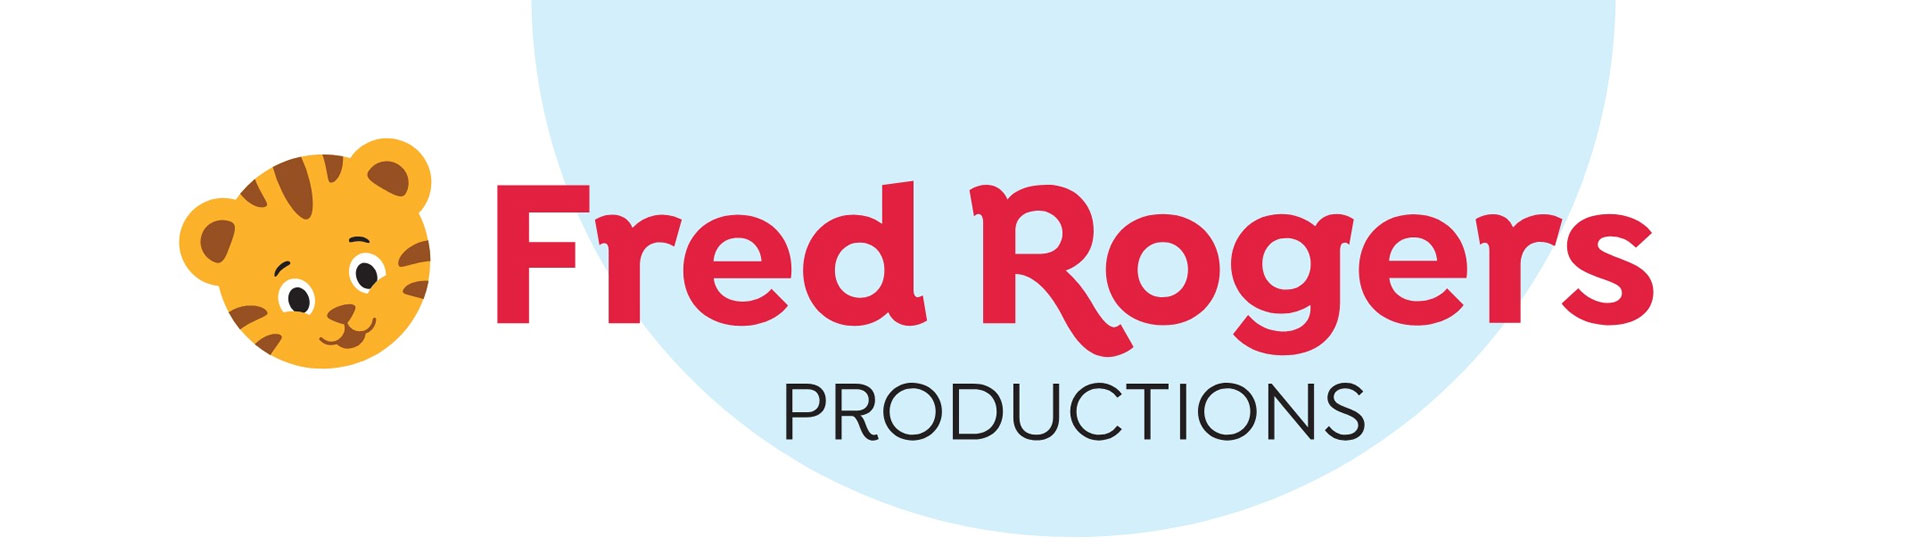 Image for Fred Rogers Productions